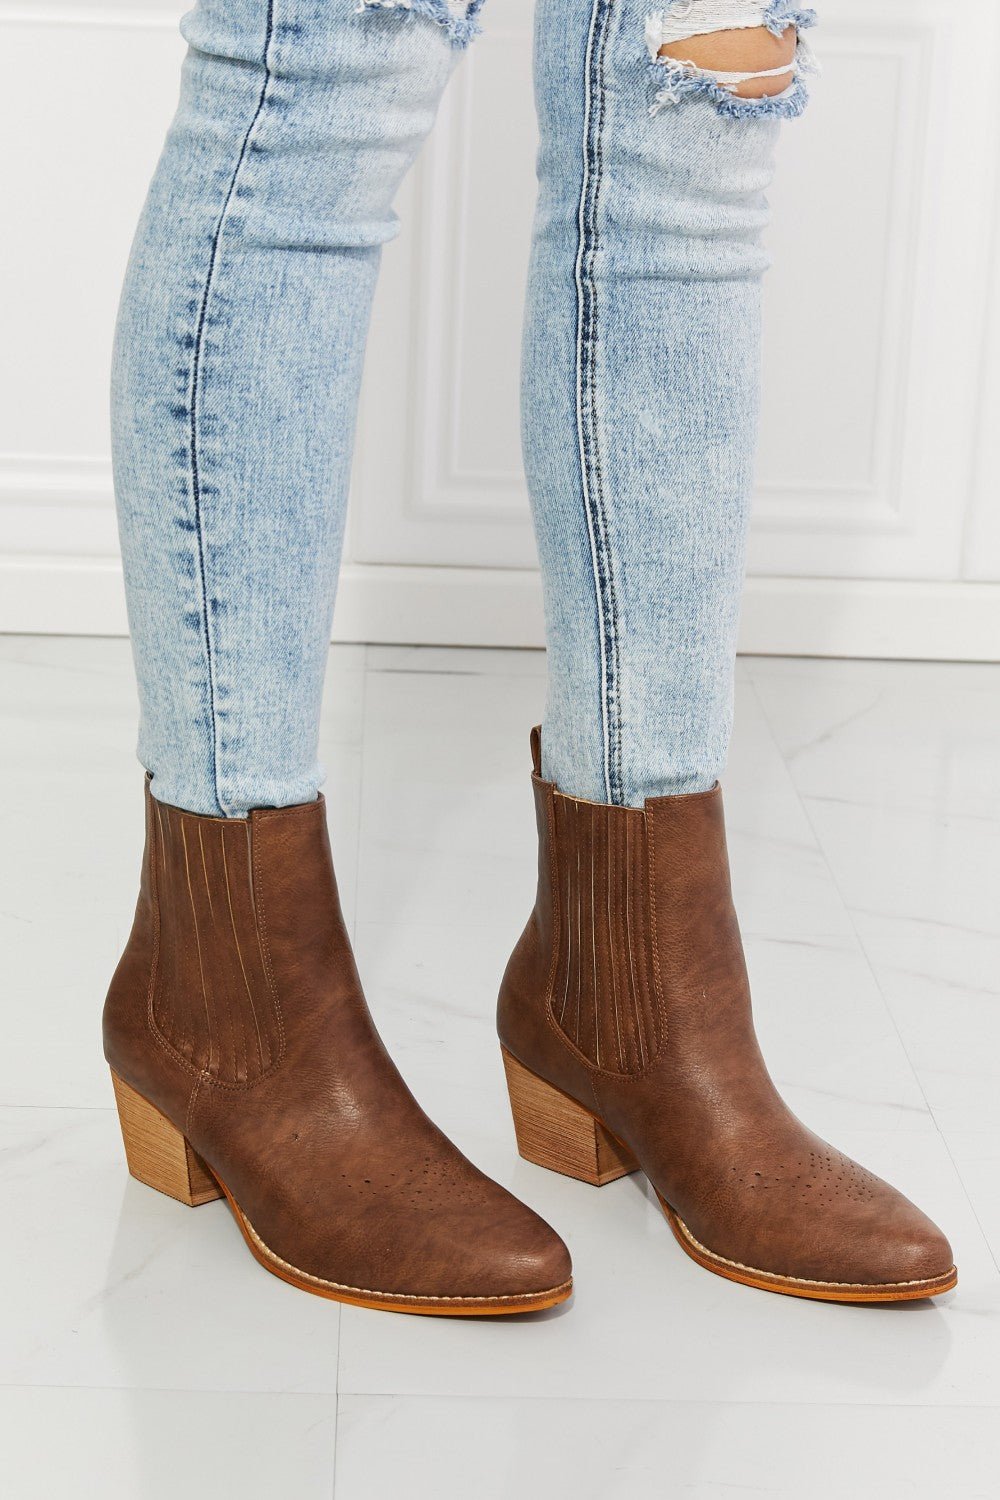 MMShoes Love the Journey Stacked Heel Chelsea Boot in Chestnut - GemThreads Boutique